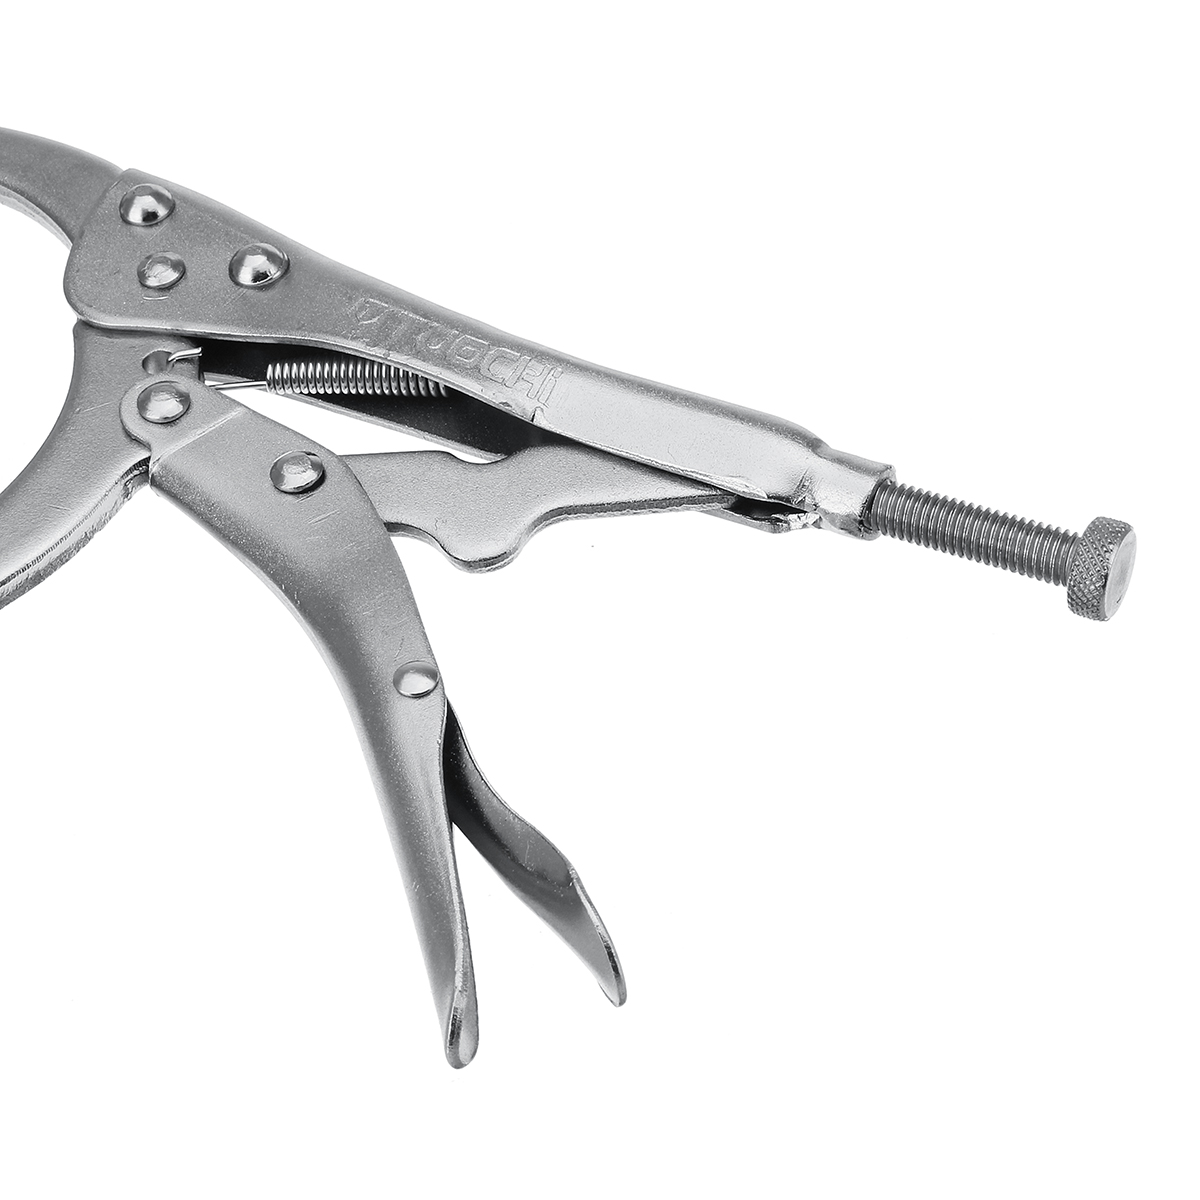 Self-Grip-Oil-Filter-Removal-Tool-Wrench-Pliers-Multi-Purpose-Hand-Remover-Tool-1446280-6